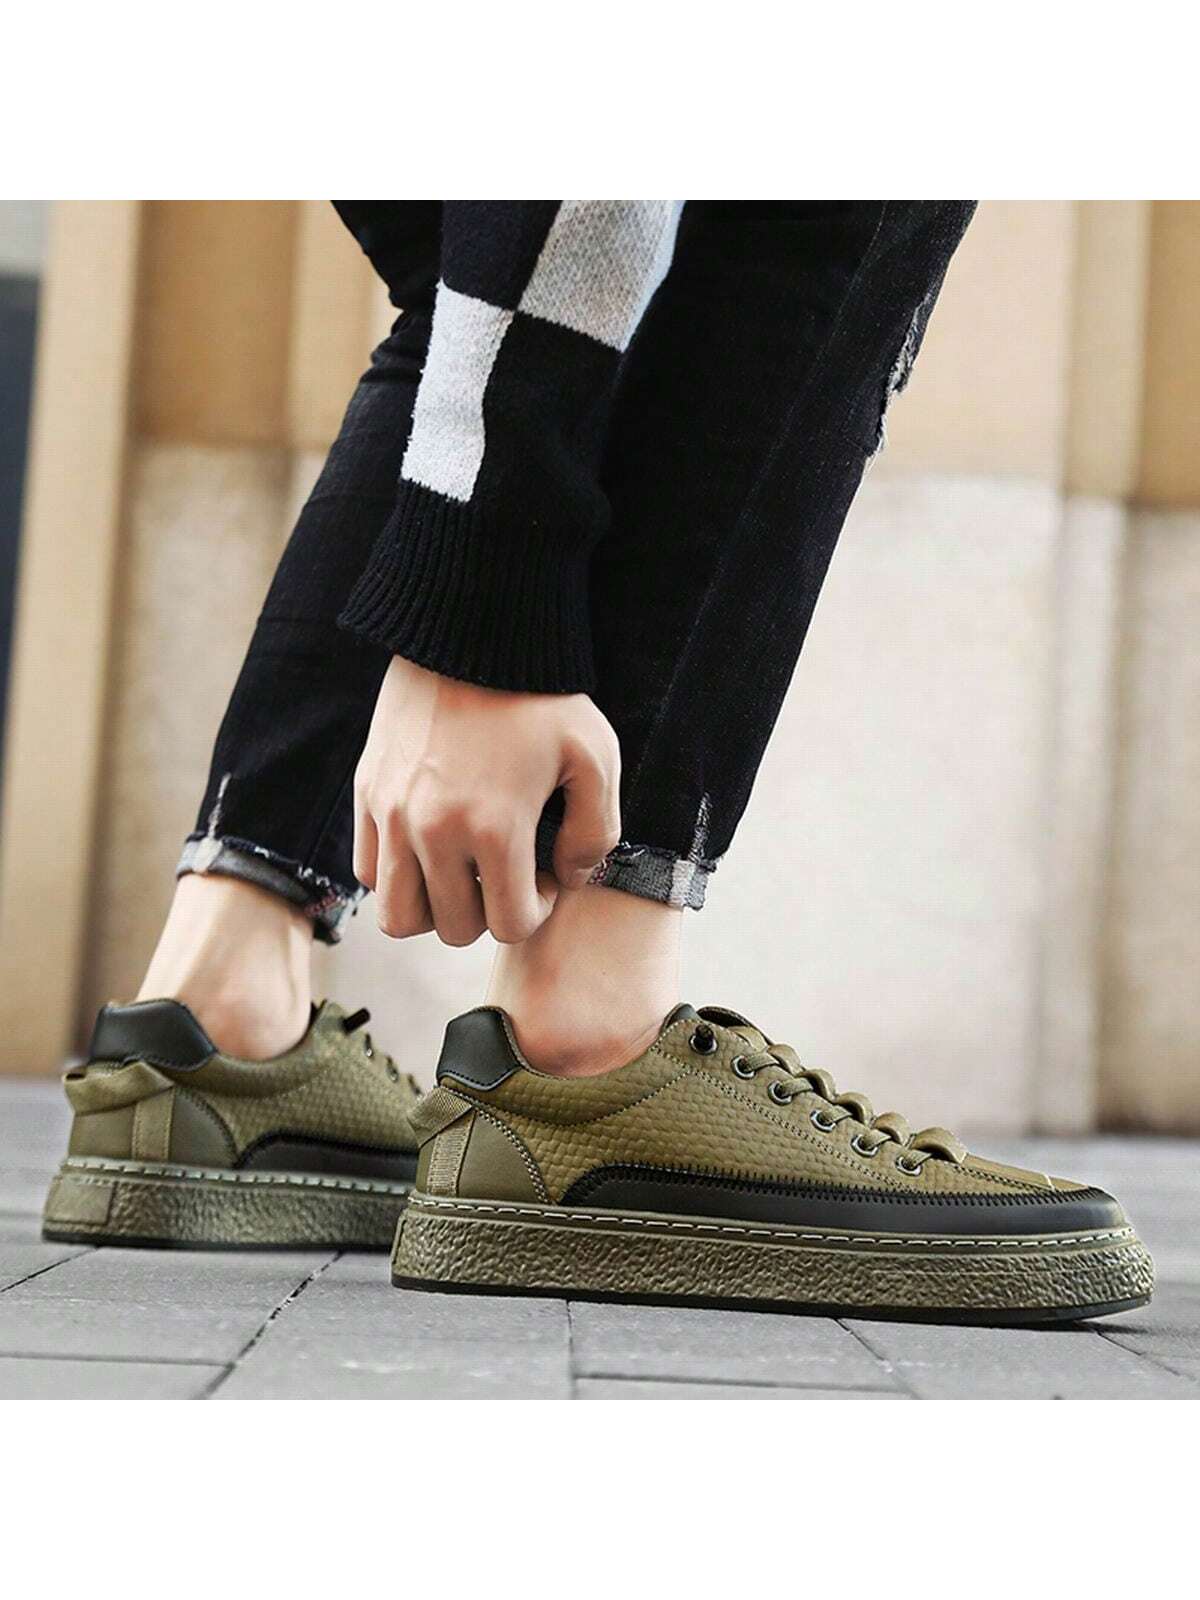 Slip-On Men's Shoes, Casual Thick-Soled Board Shoes, Trendy Leather Surface, Simple And Fashionable, For Autumn And Winter